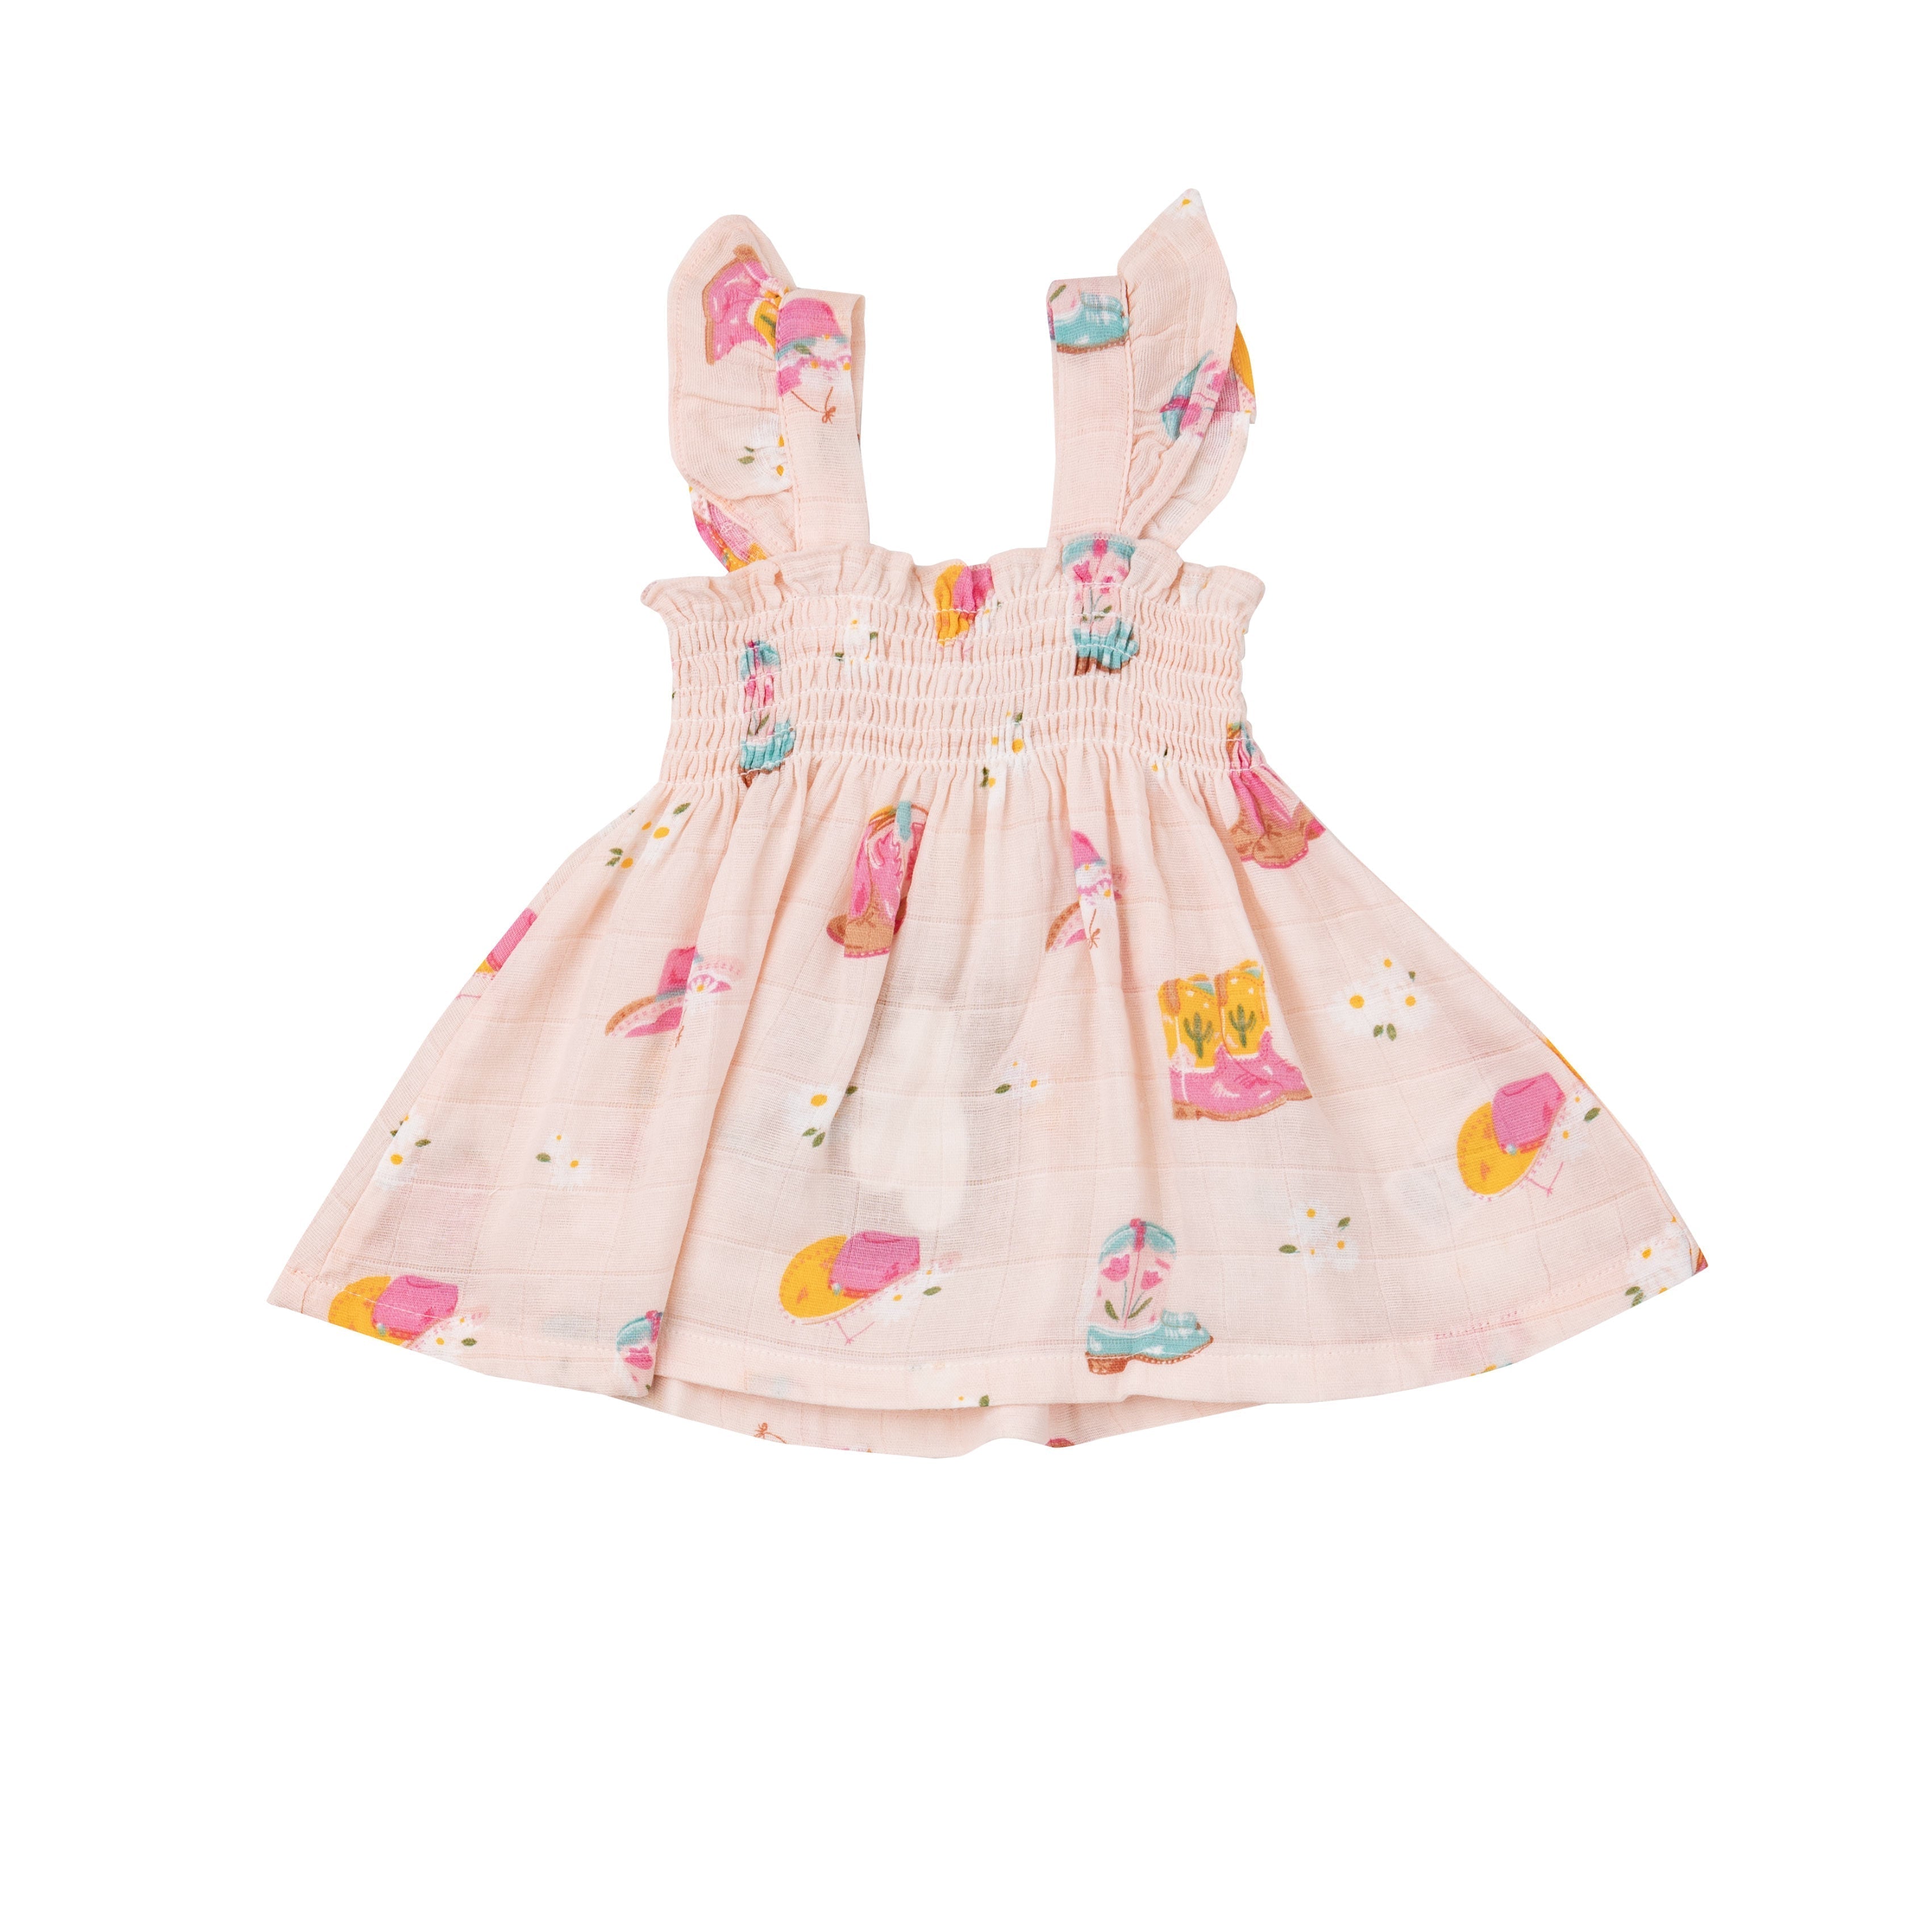 Ruffle Strap Smocked Top And Diaper Cover - Daisy Boots